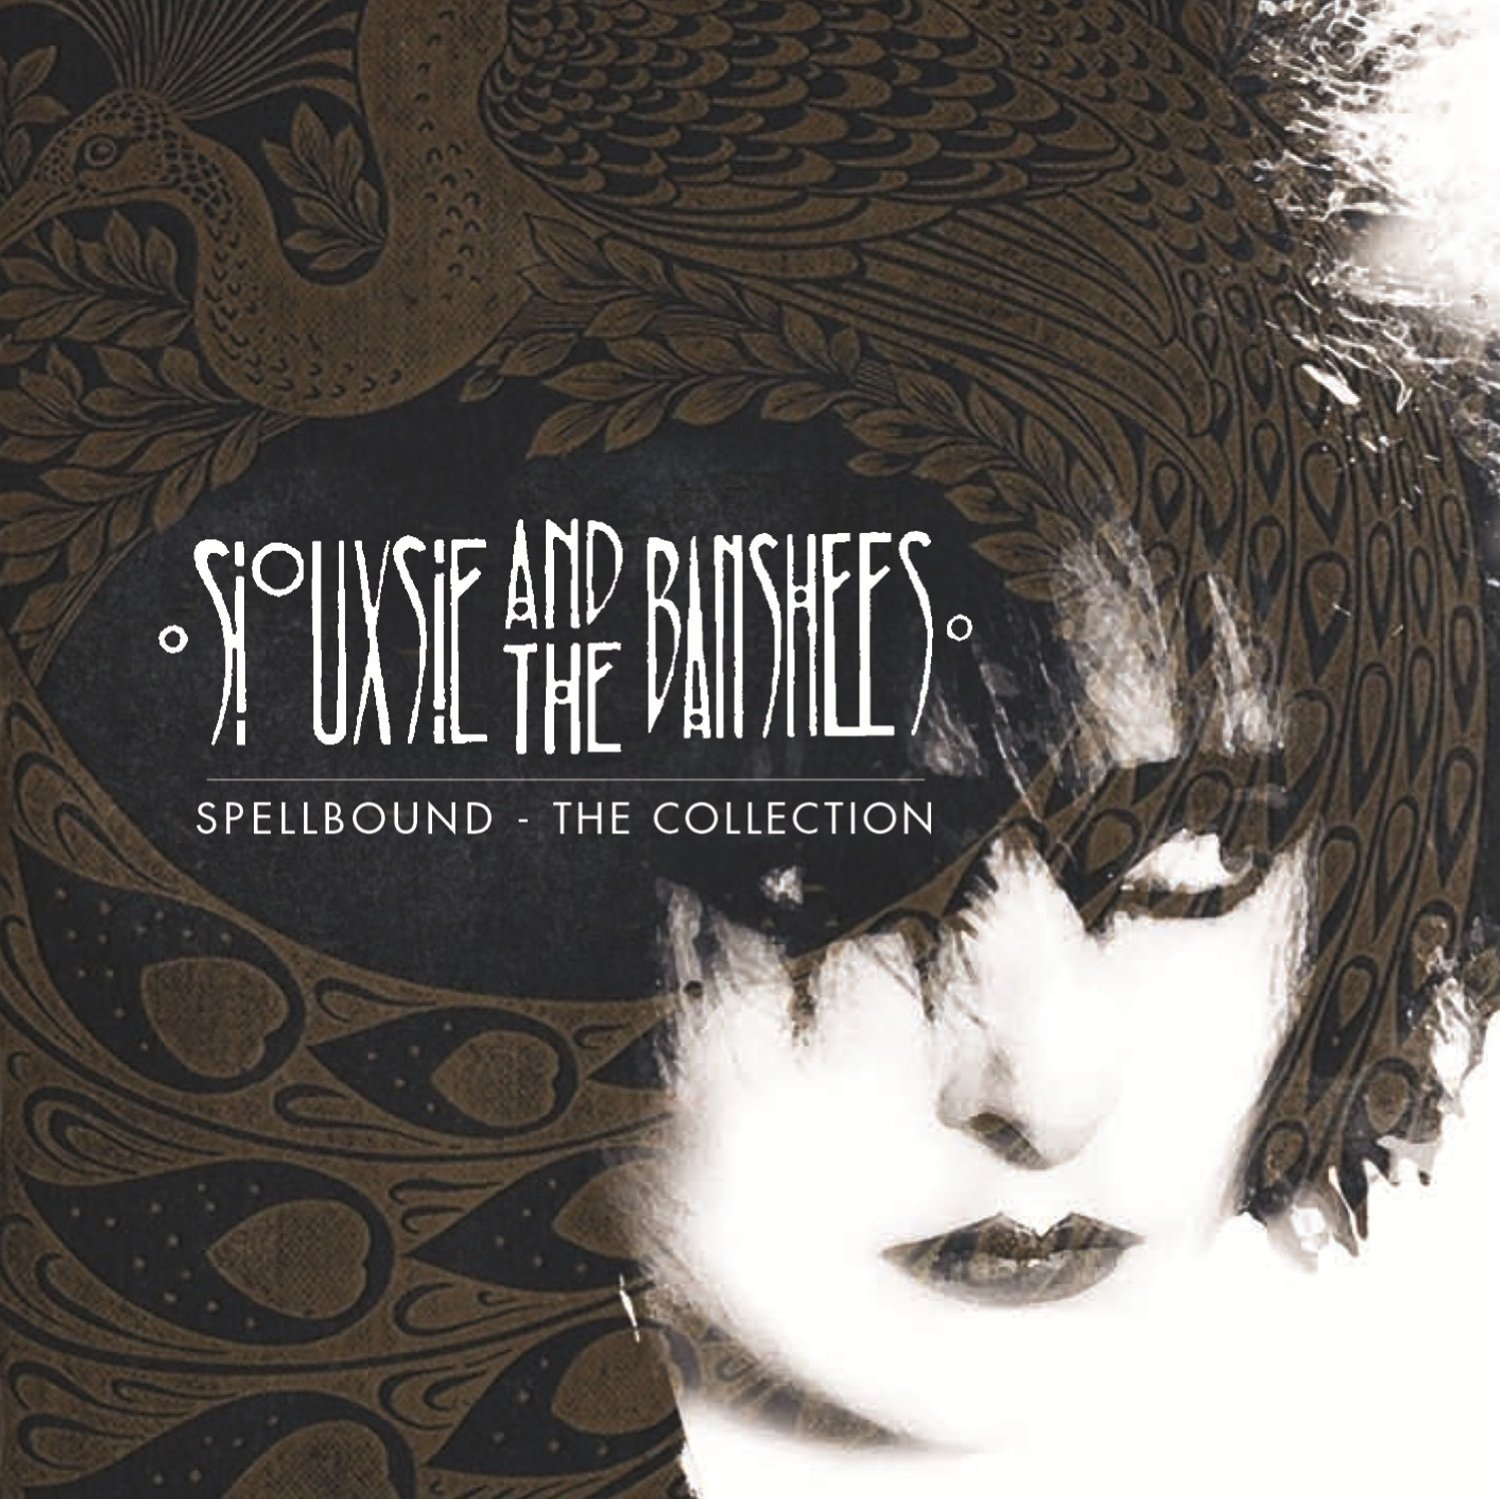 Siouxsie and the Banshees - Spellbound (The Collection) (Music CD)